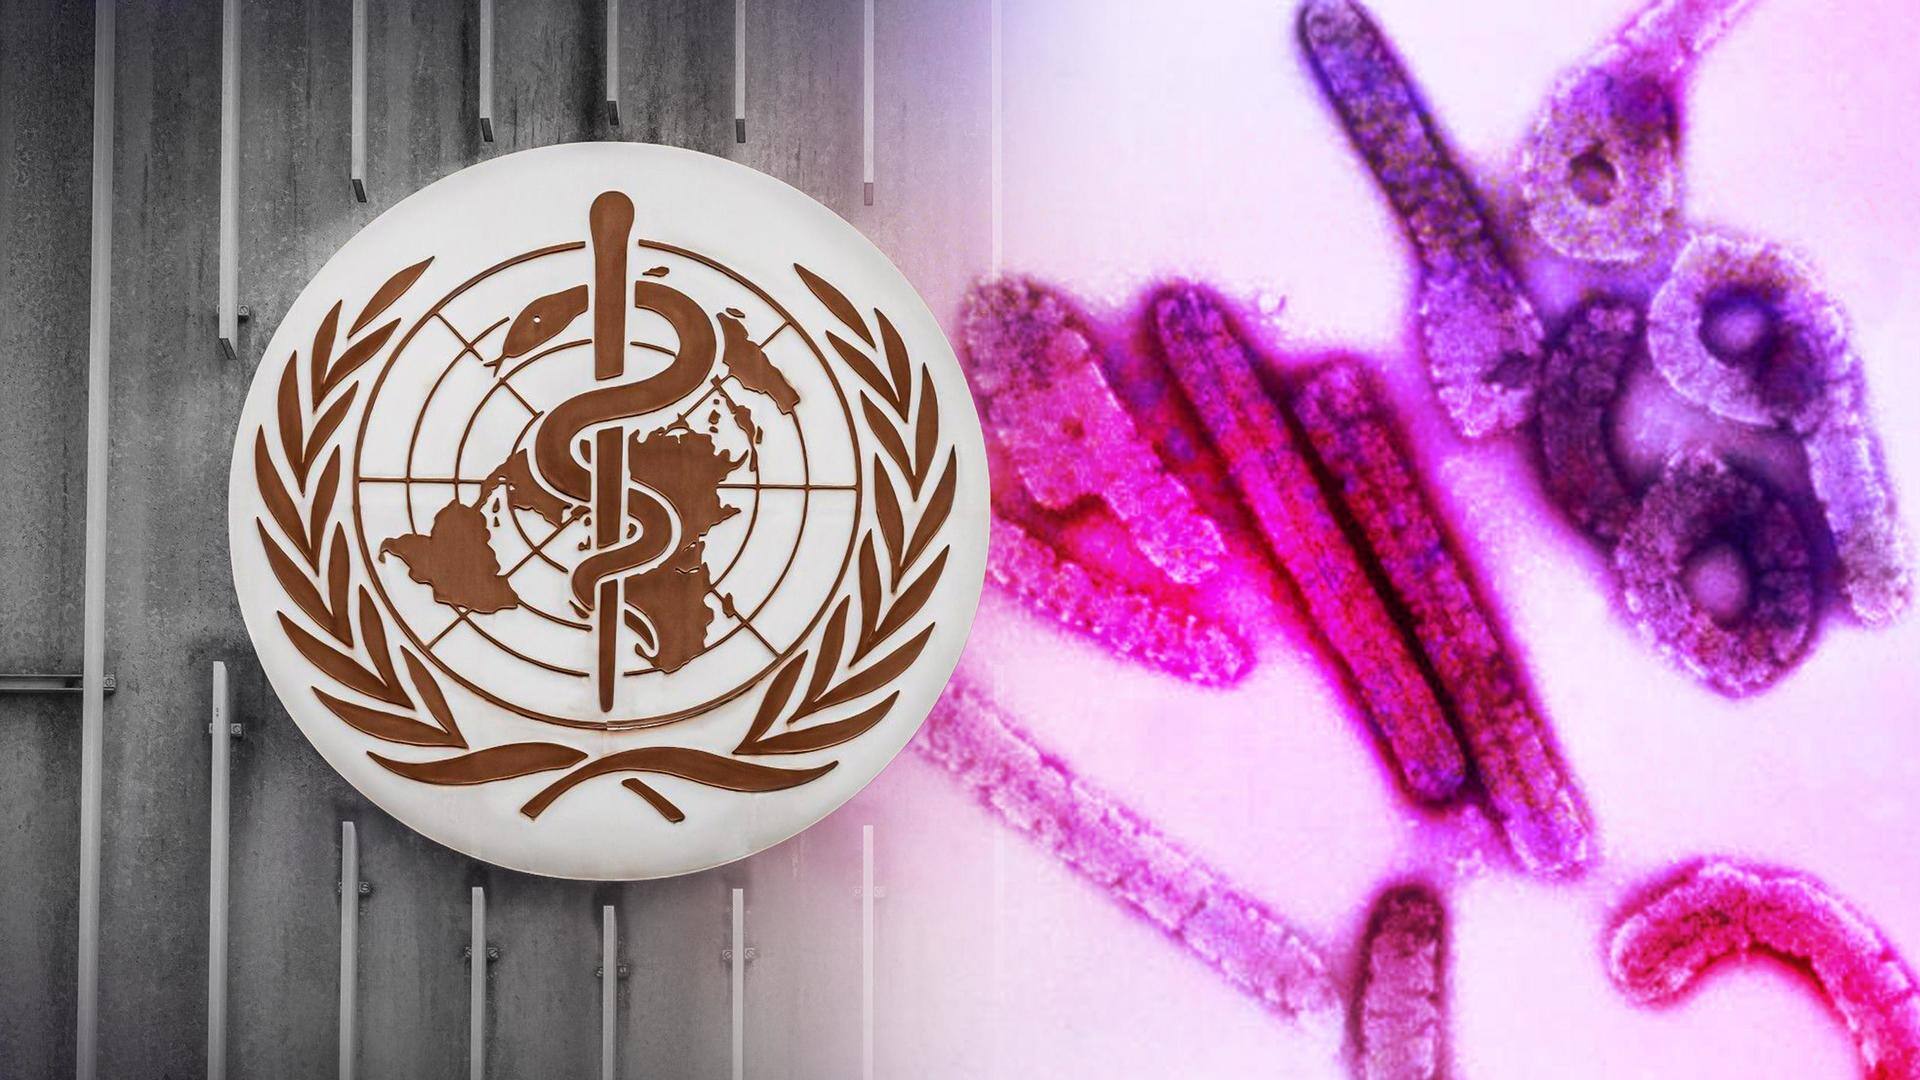 WHO confirms Marburg disease outbreak in Equatorial Guinea: Details here